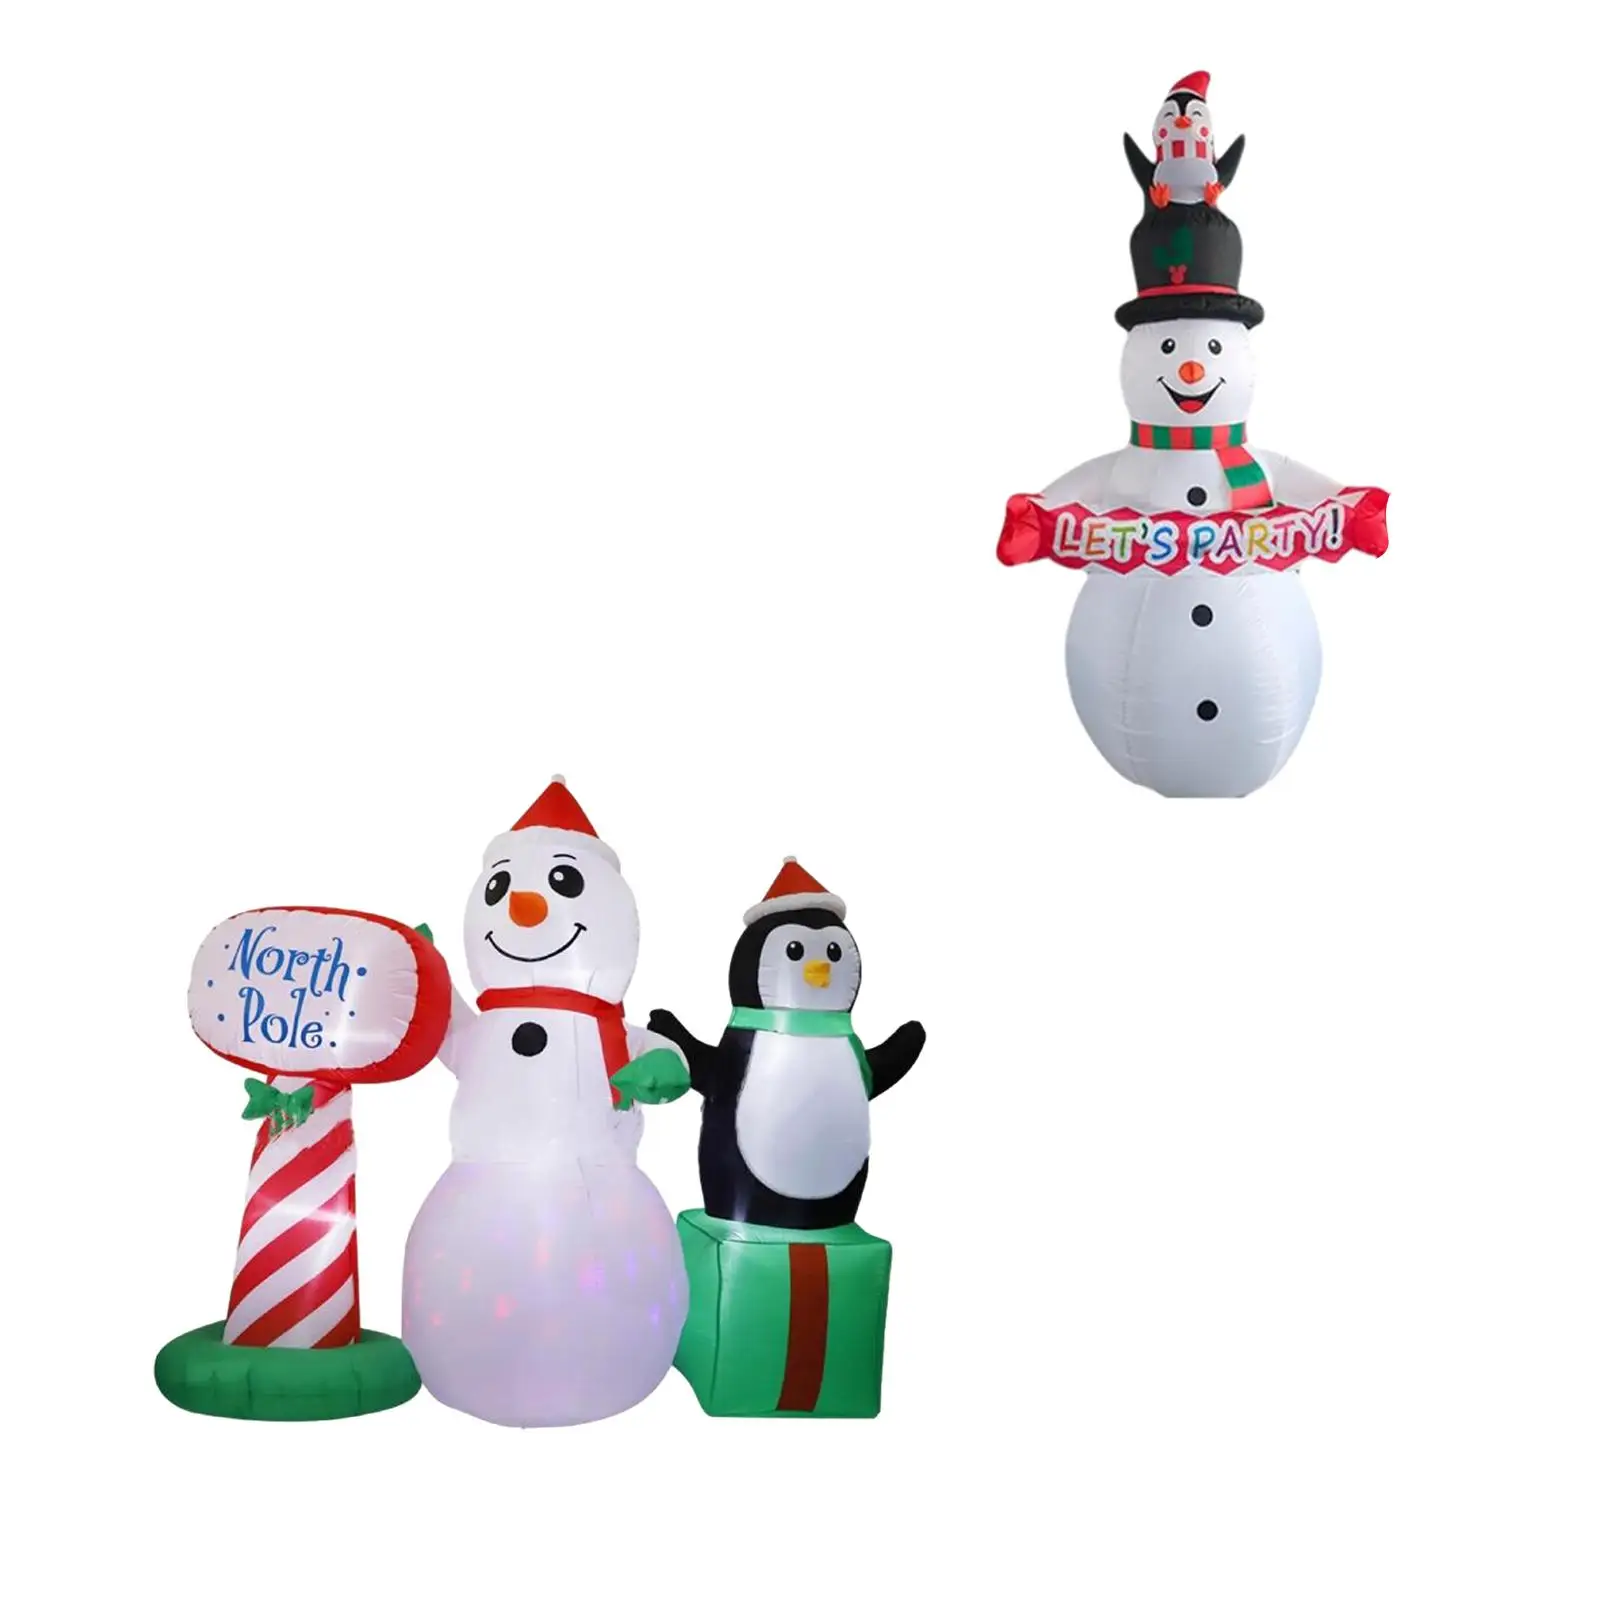 Inflatable Snowman Luminous Large Ornament with LED Lights Christmas Decor Blow up Snow Man for Lawn Winter Xmas Indoor Party